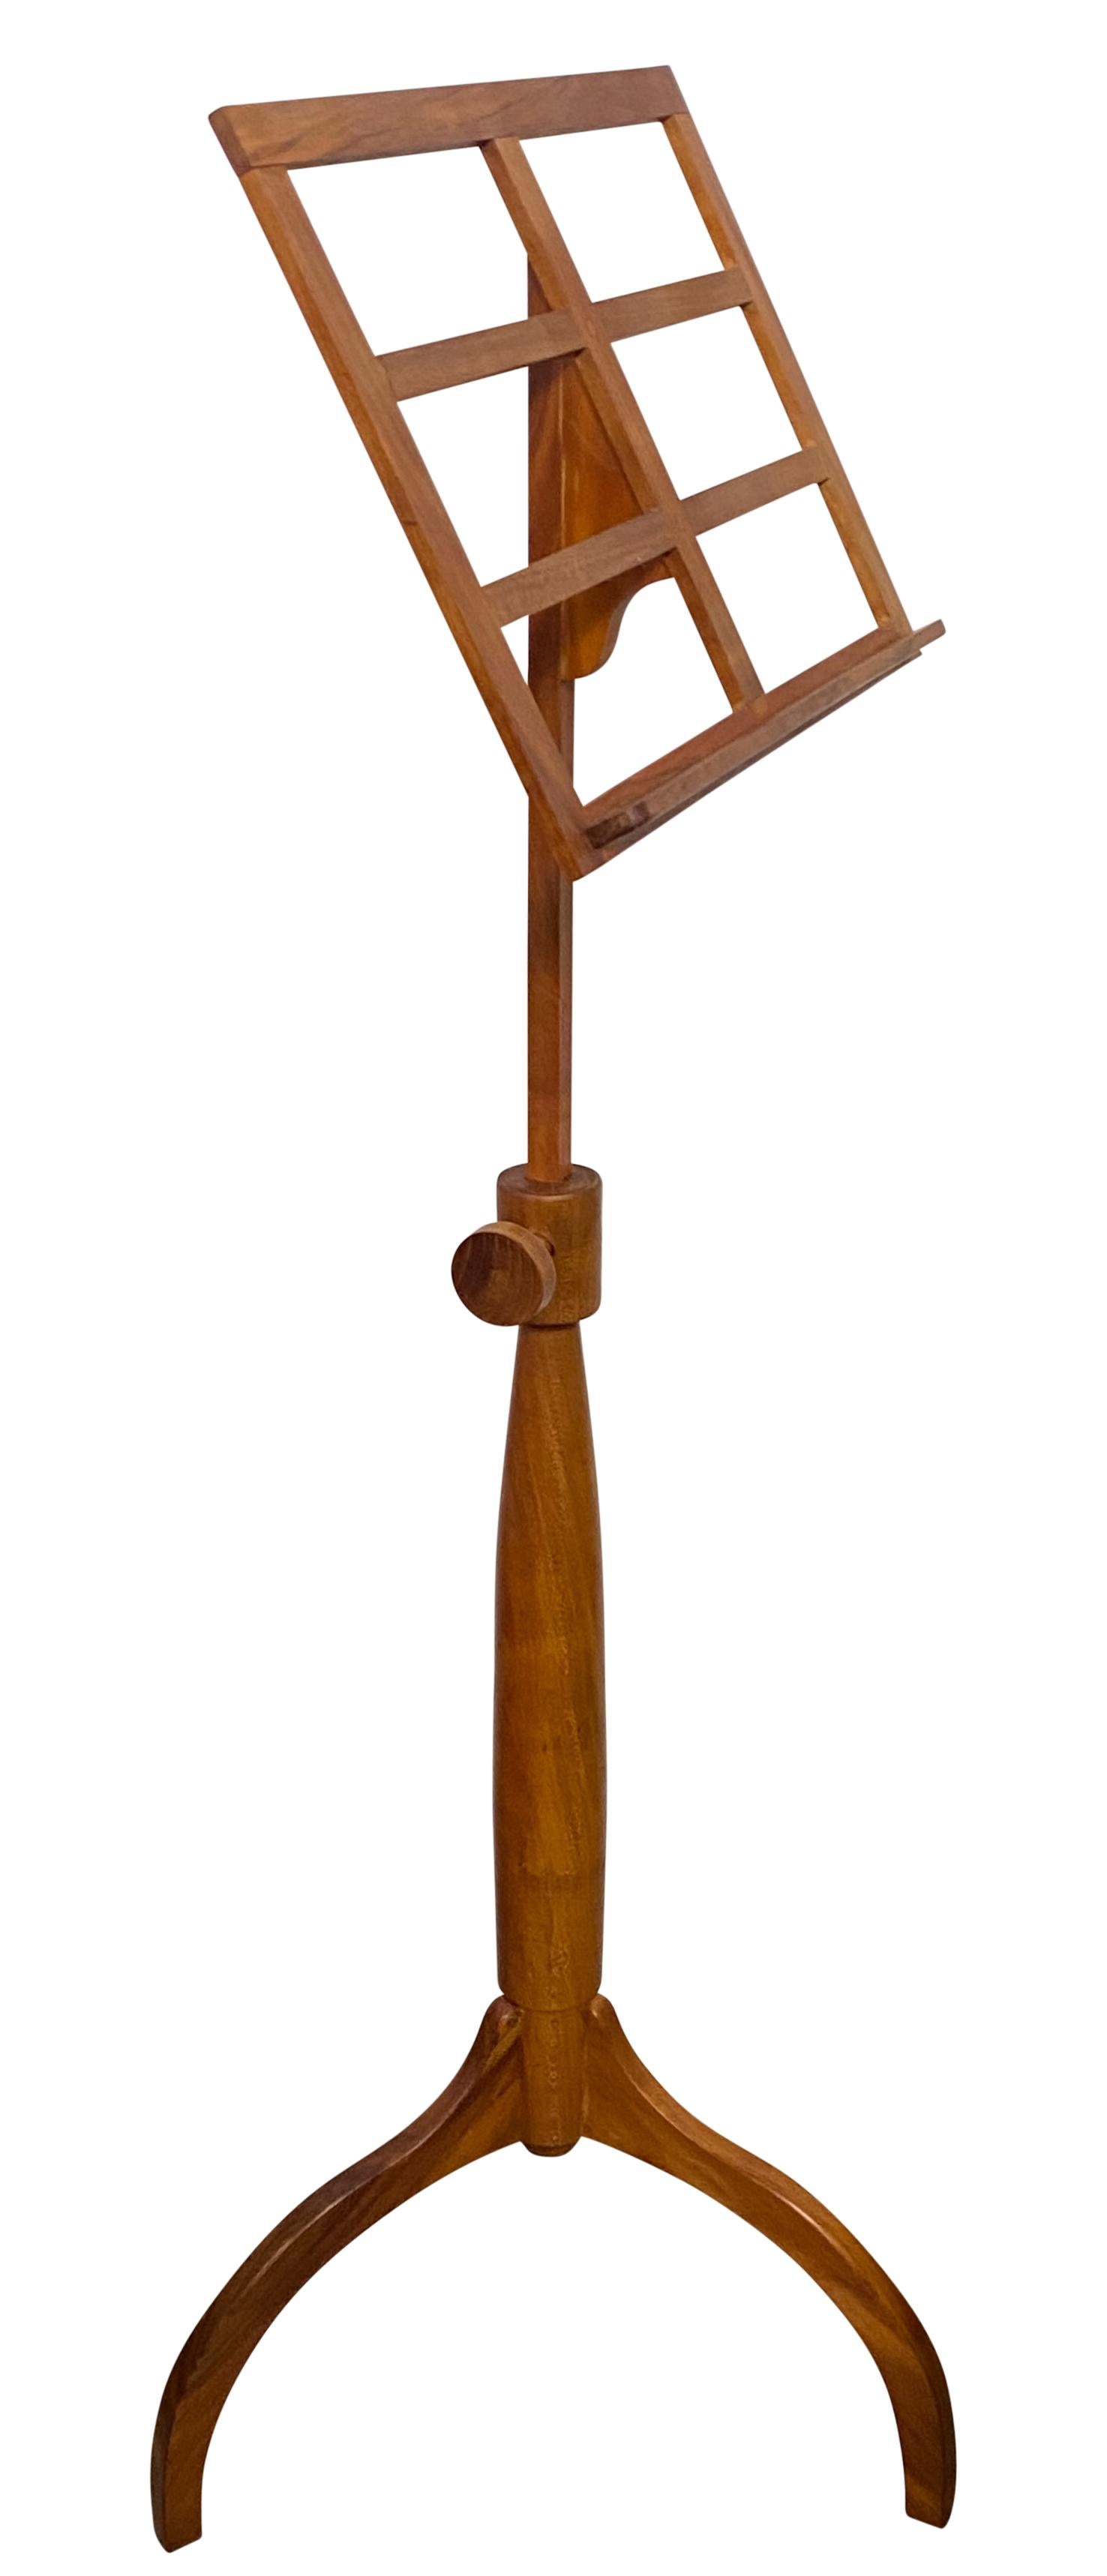 American Shaker Work Shop Style Cherry Wood Music Stand For Sale